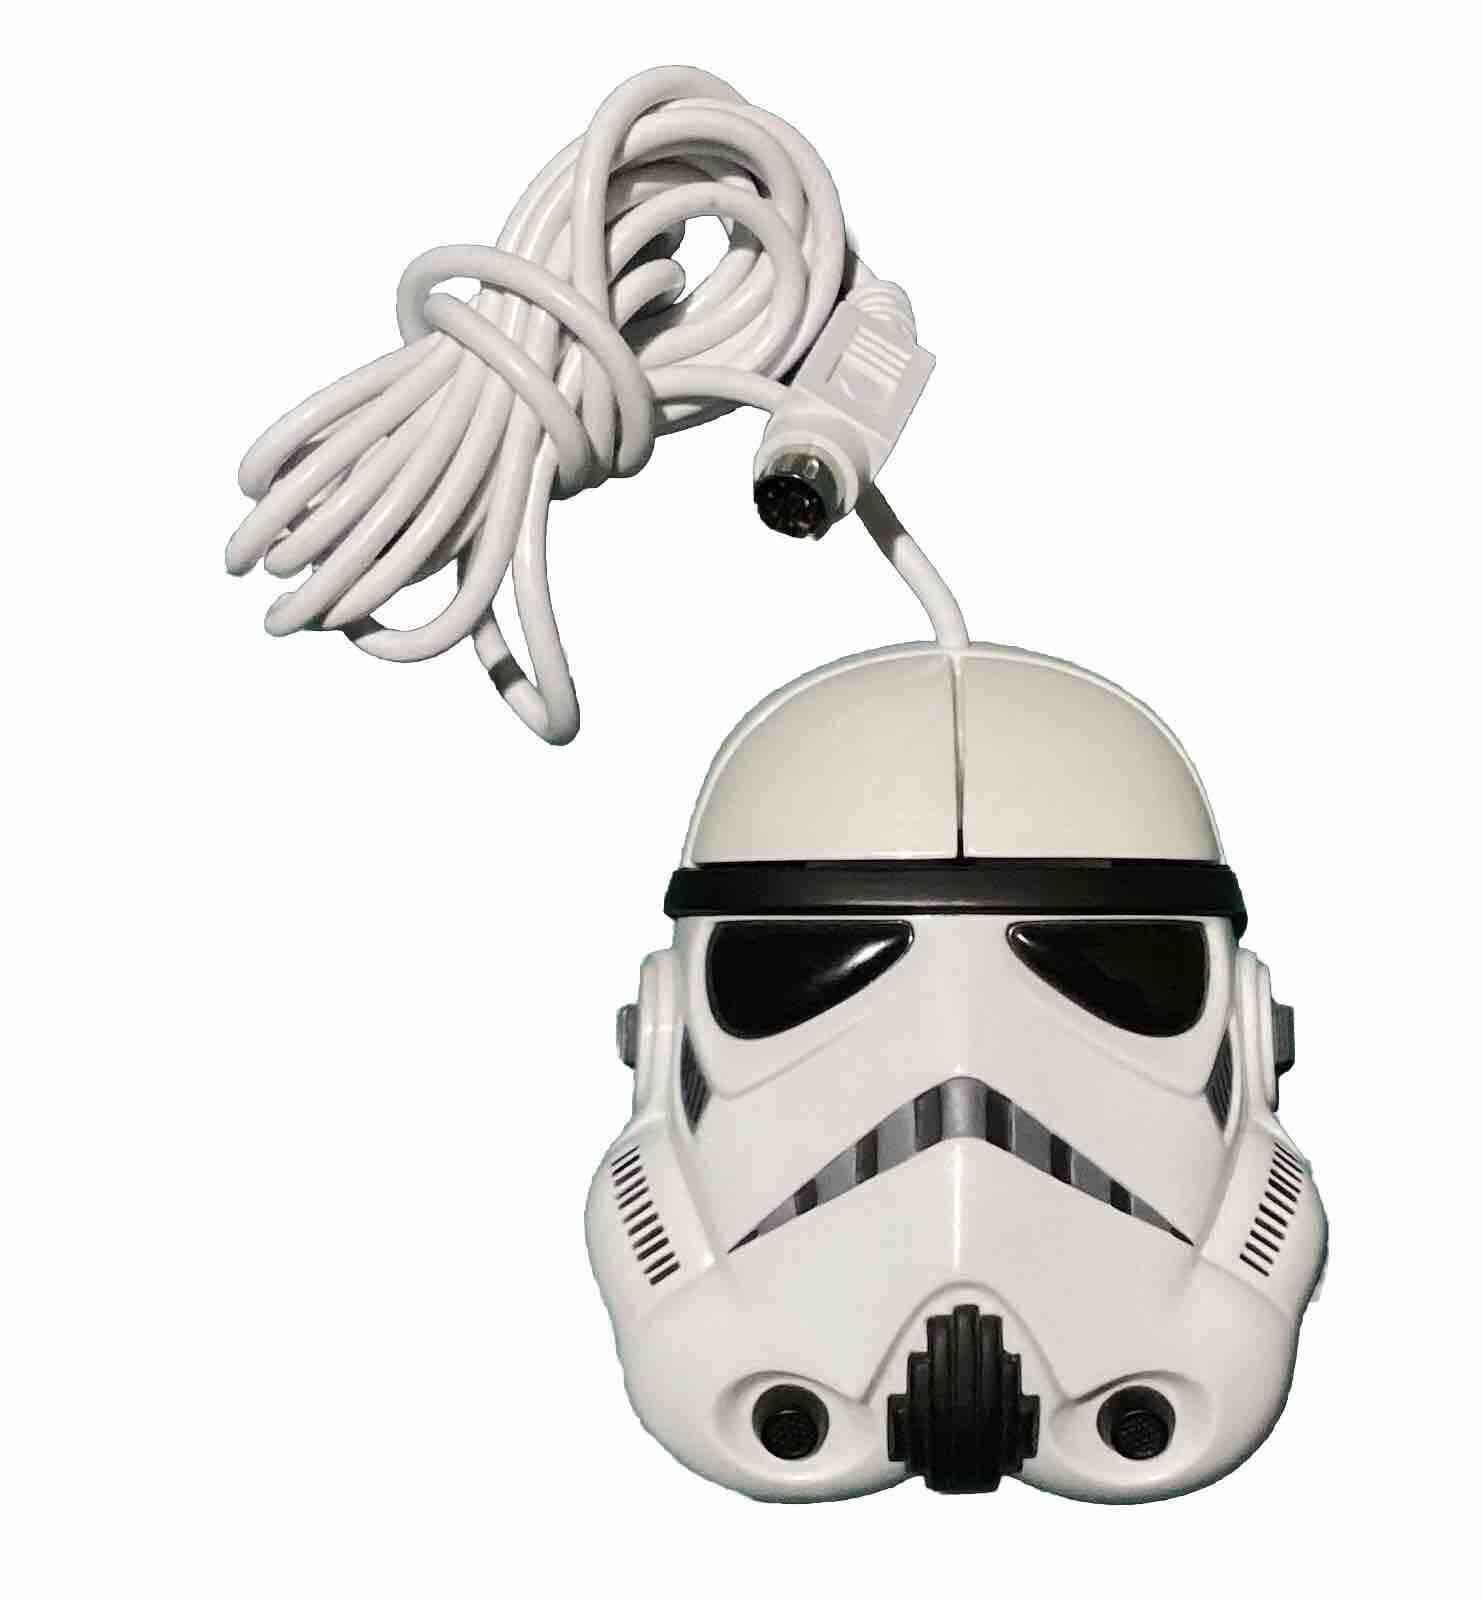 Star Wars Stormtrooper Computer Mouse WWL Model #0254